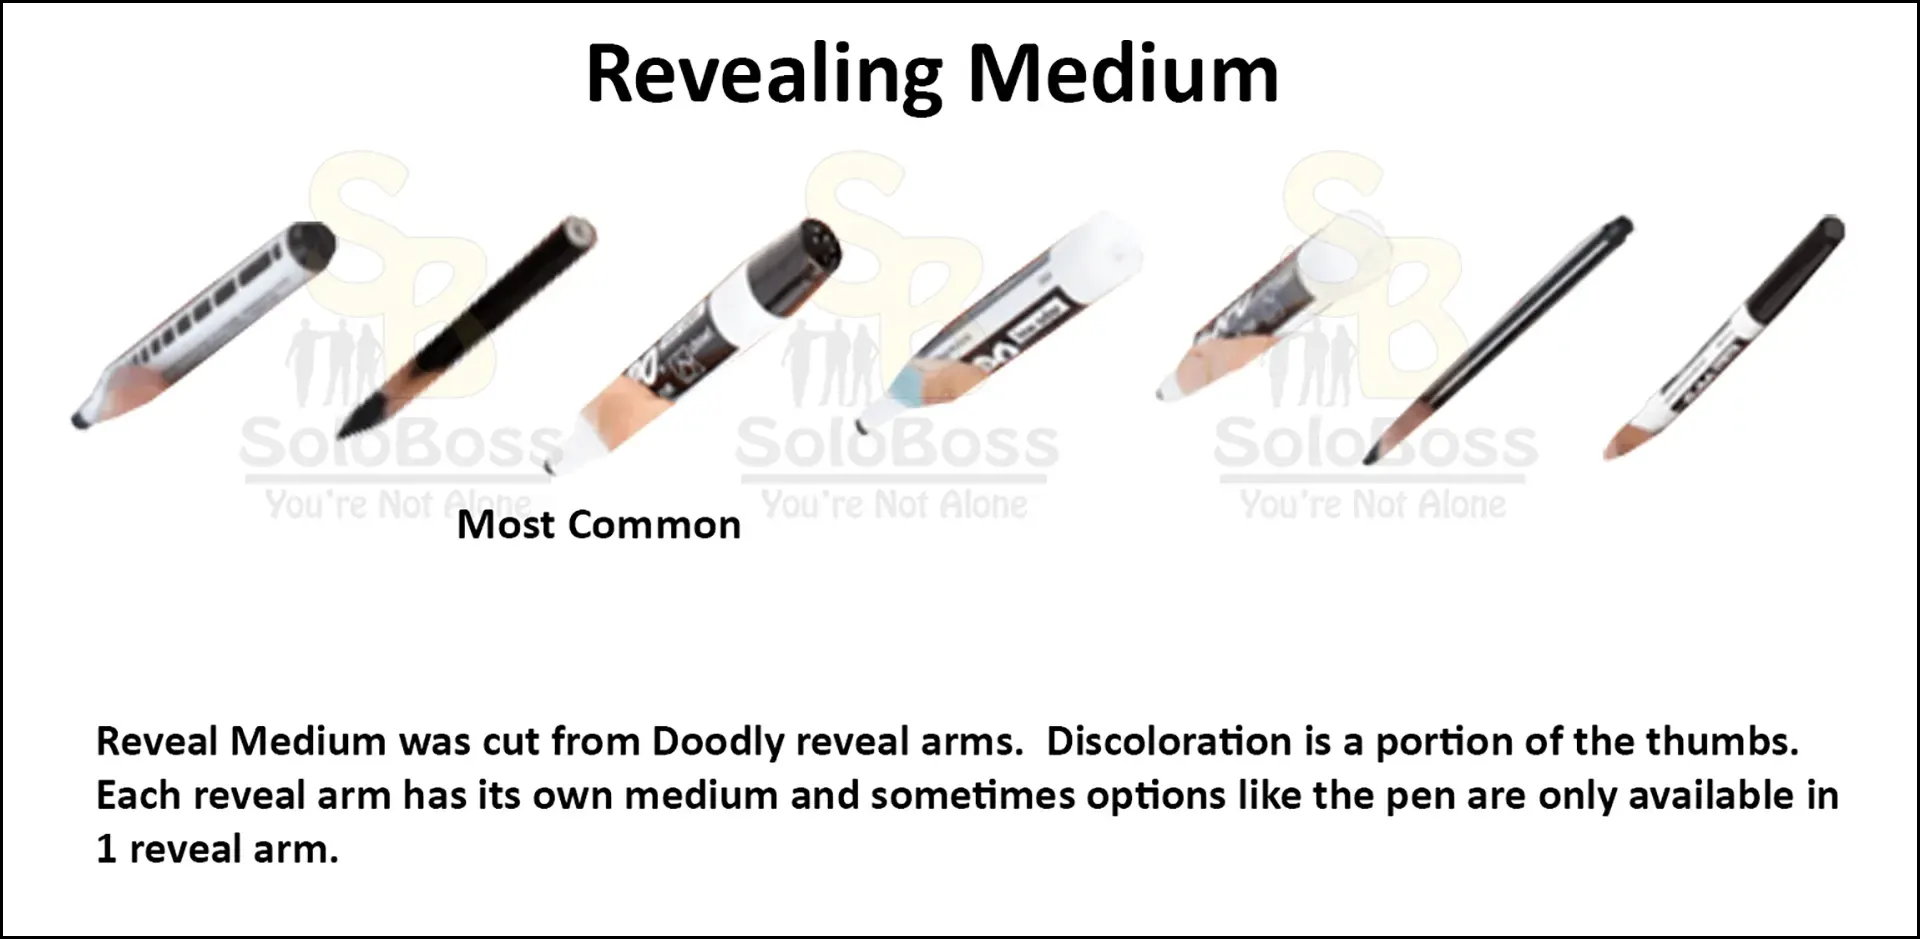 Showing the various types of drawing medium in Doodly.